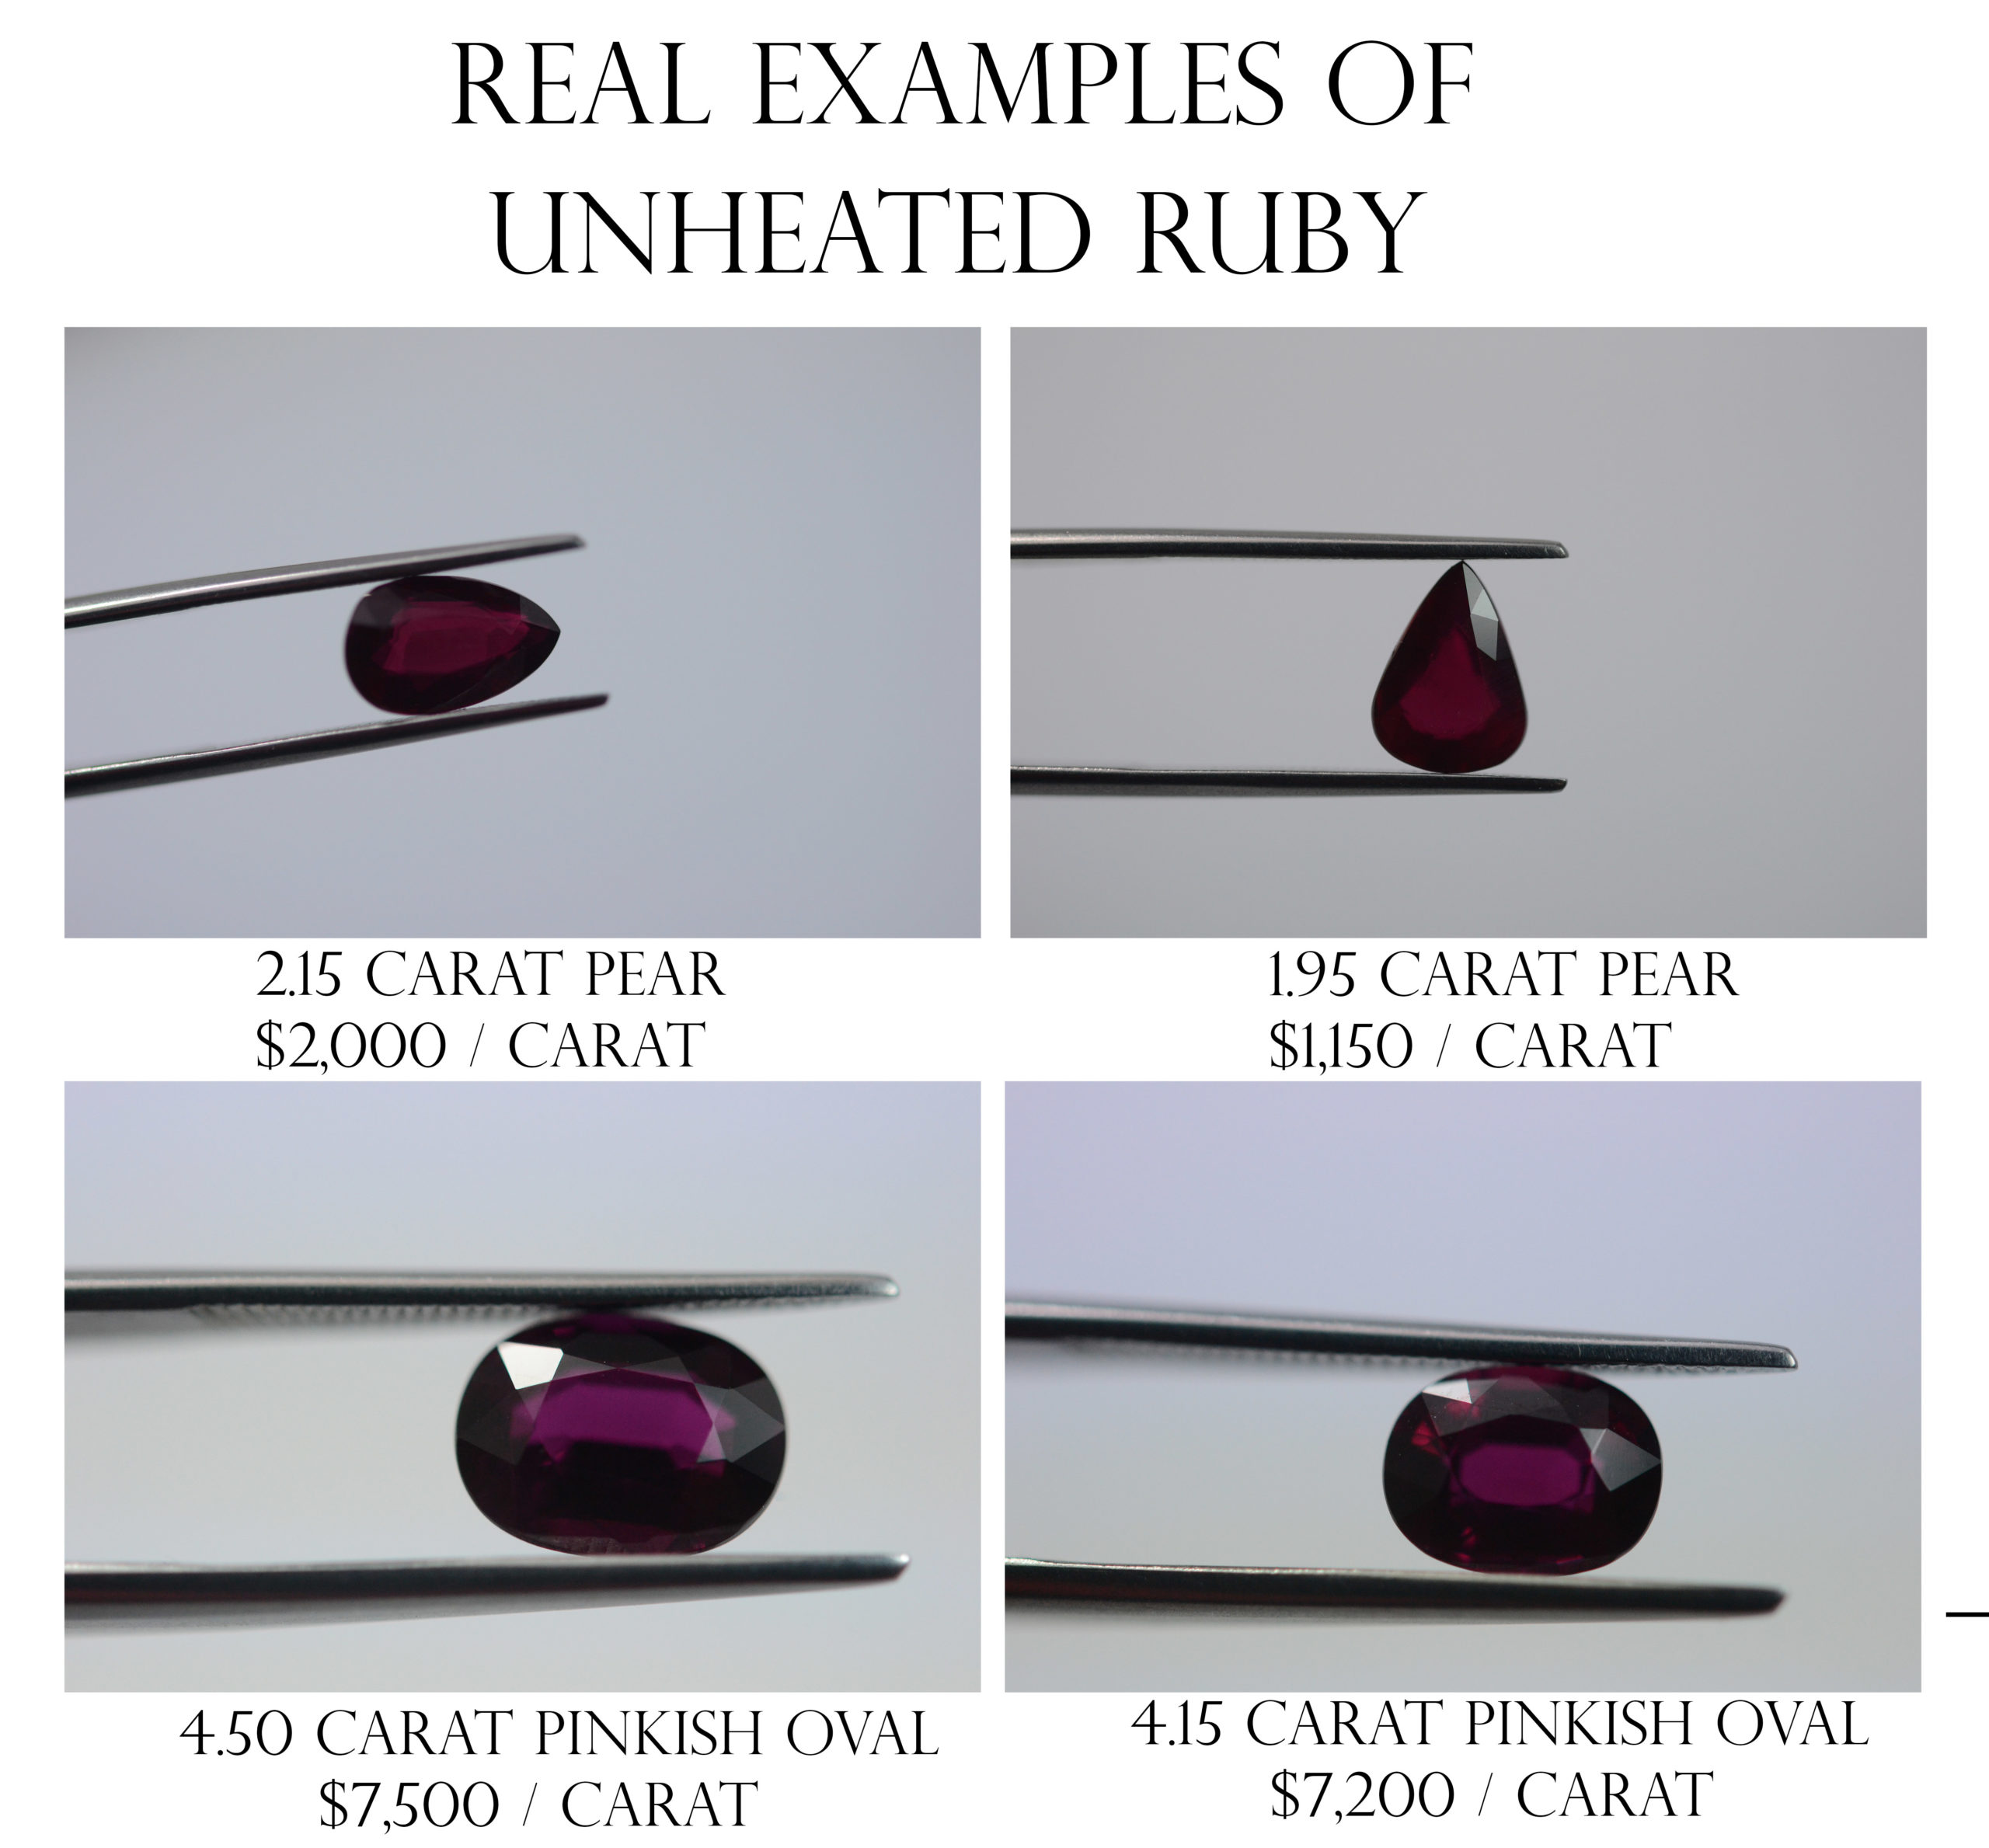 Unheated ruby examples